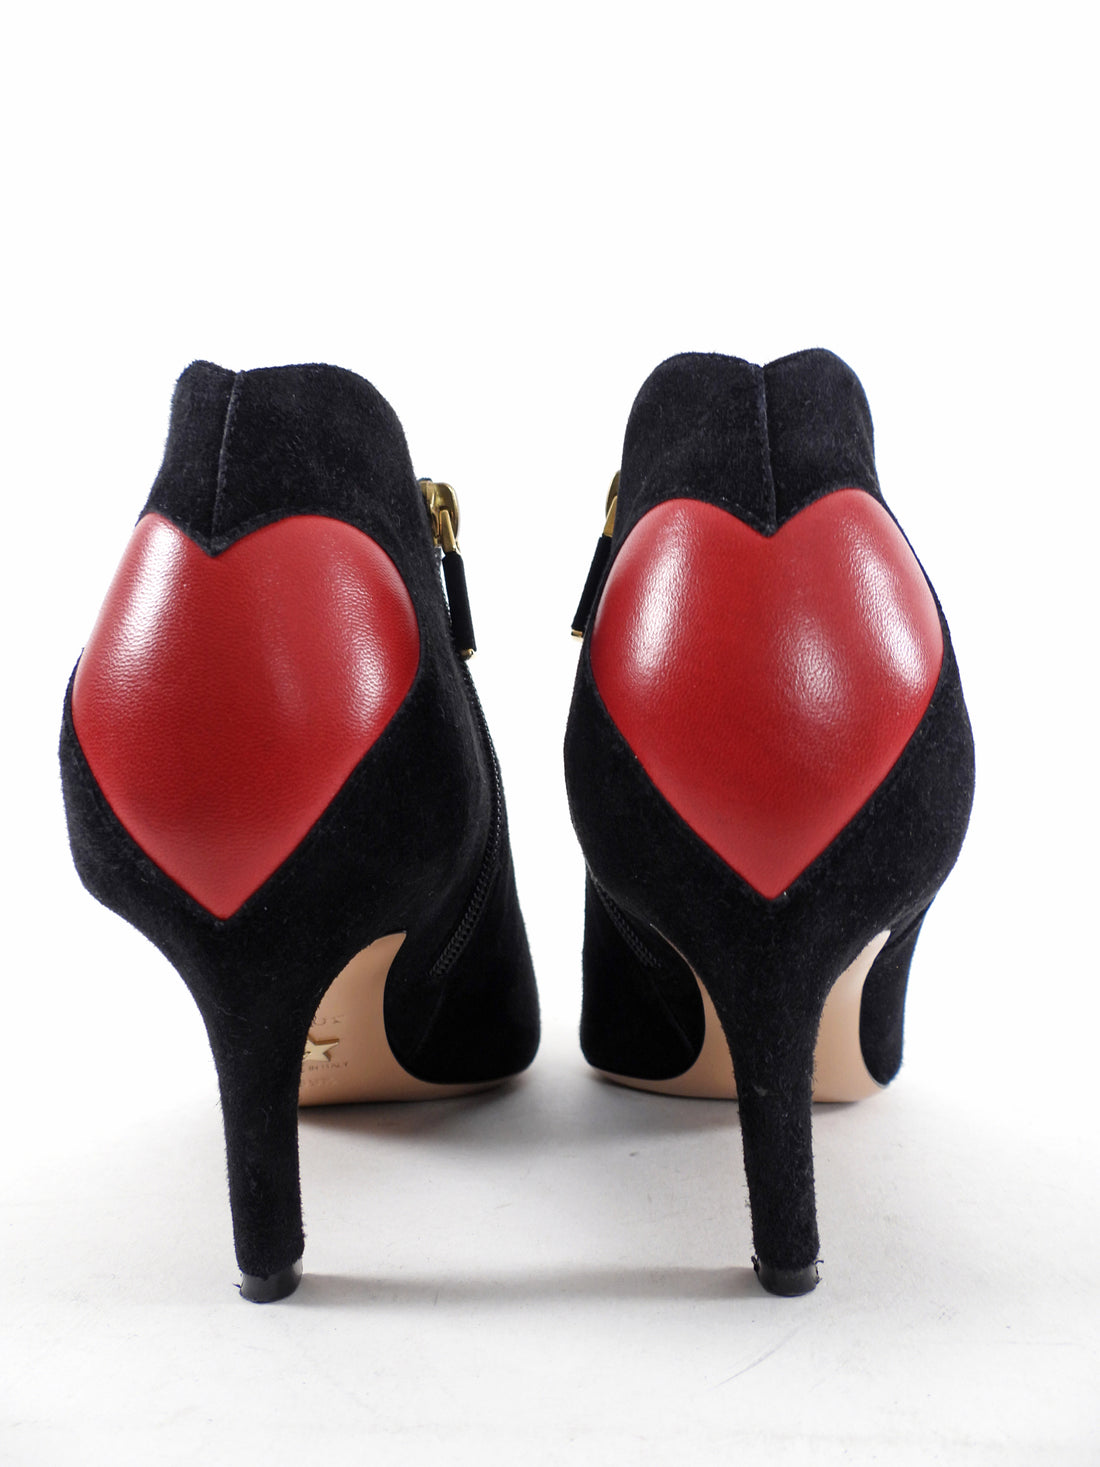 Dior Black Suede Ankle Boots with Red Leather Heart - 39.5 / 9